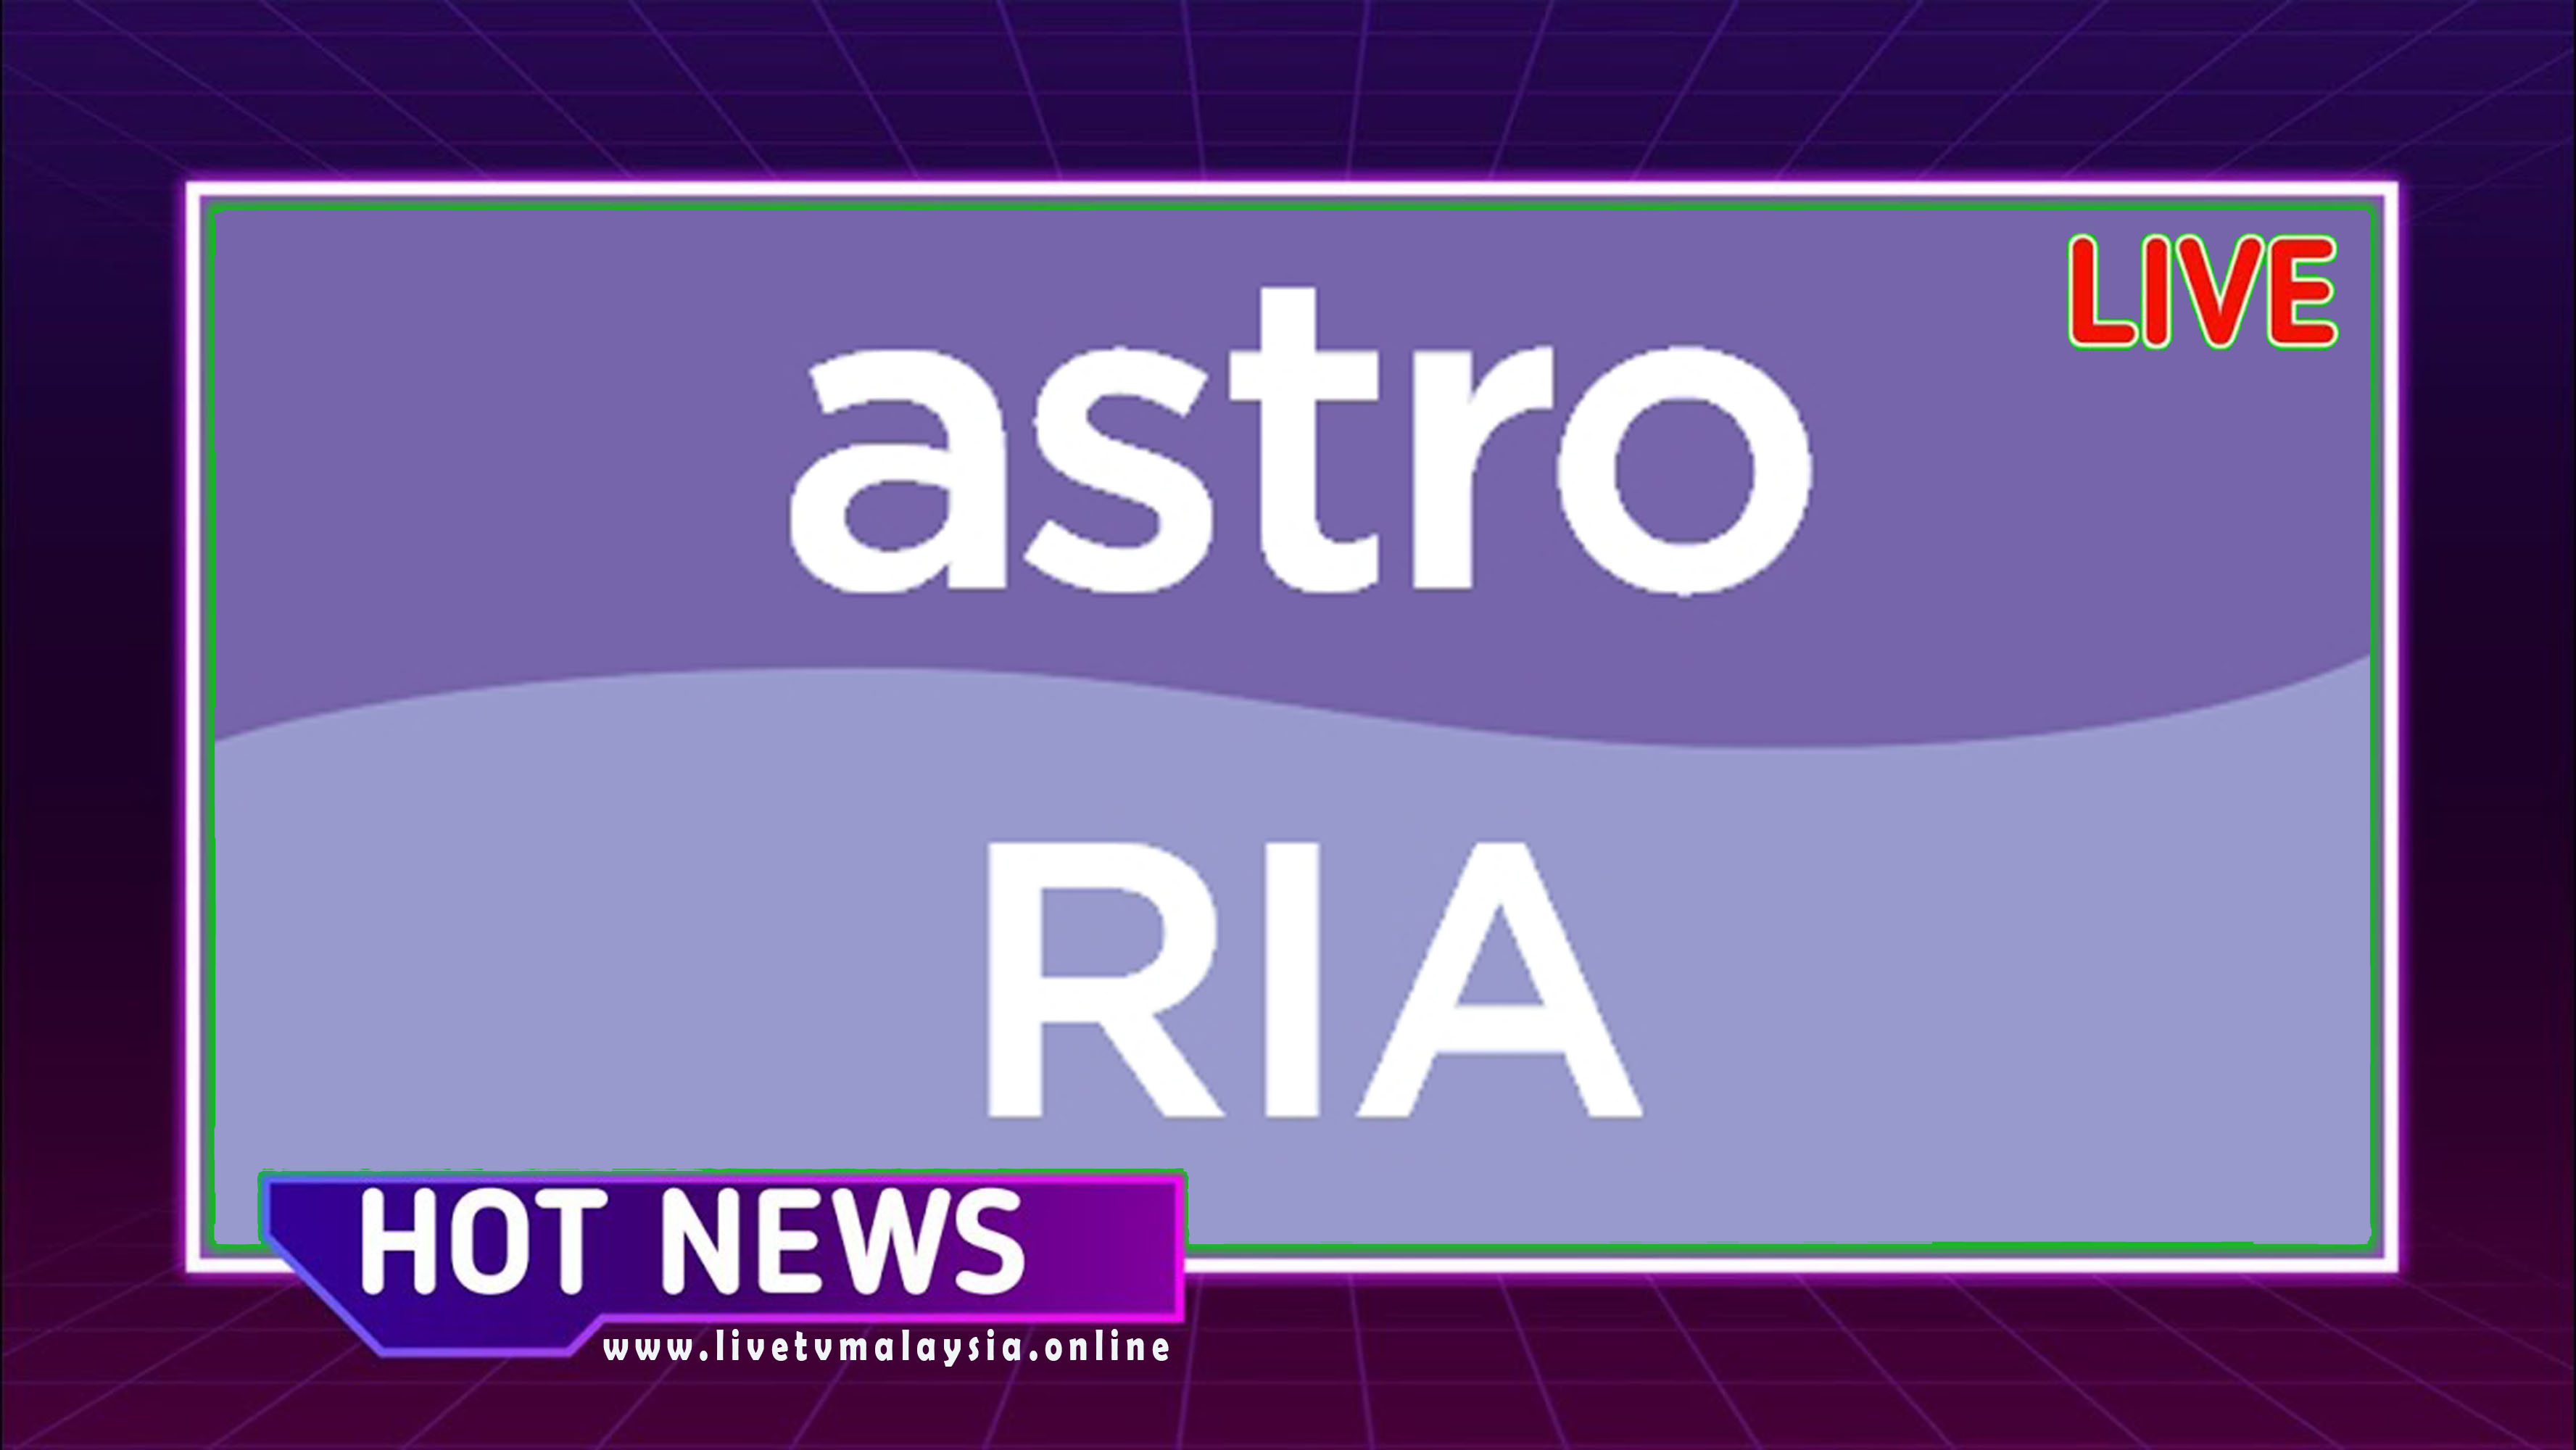 Live Streaming Astro Ria for Free - wide 3